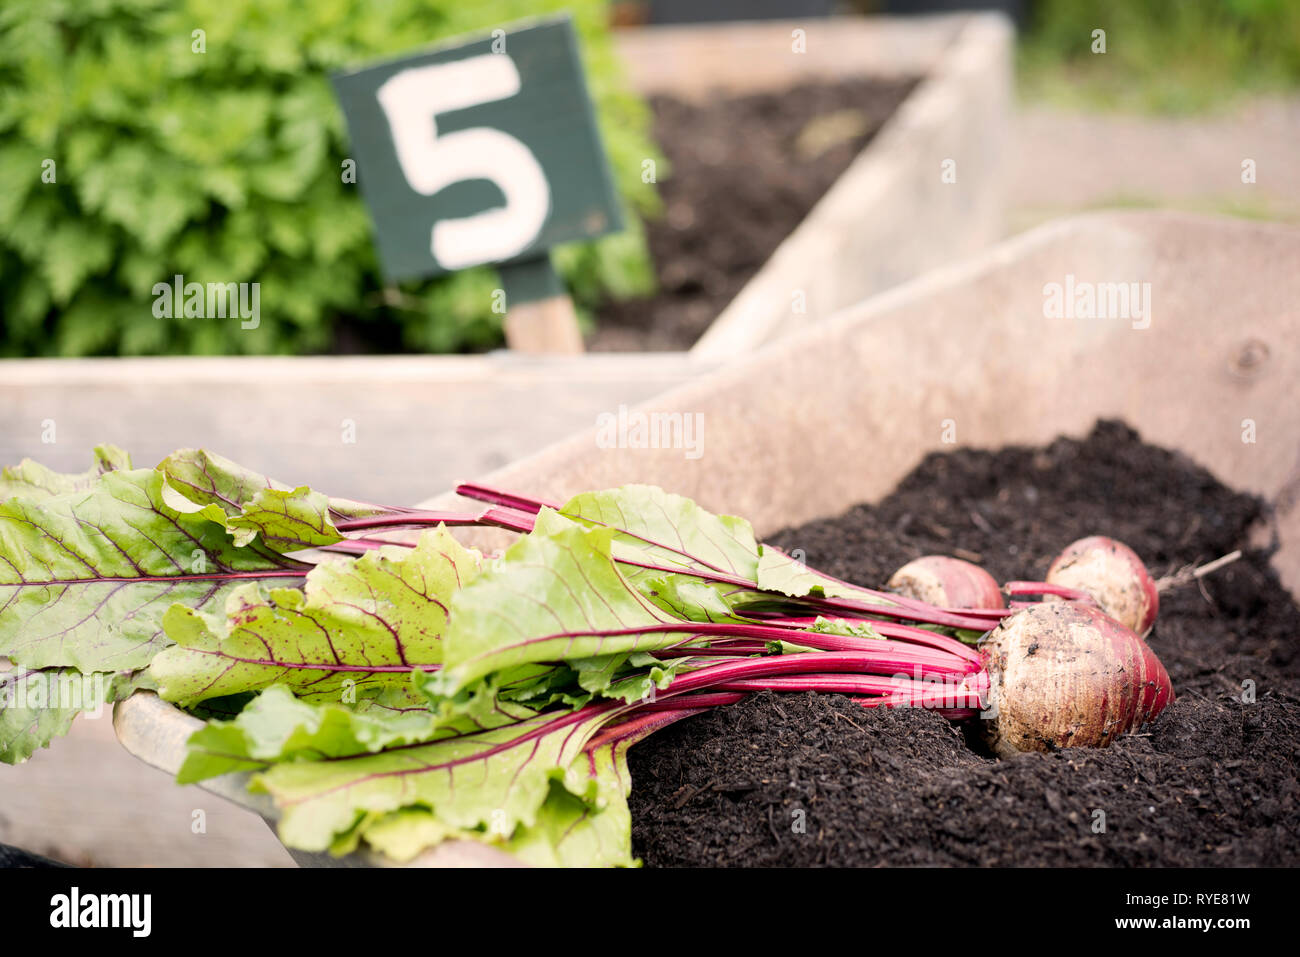 Beetroot in a wheelbarrow with compost, UK Stock Photo